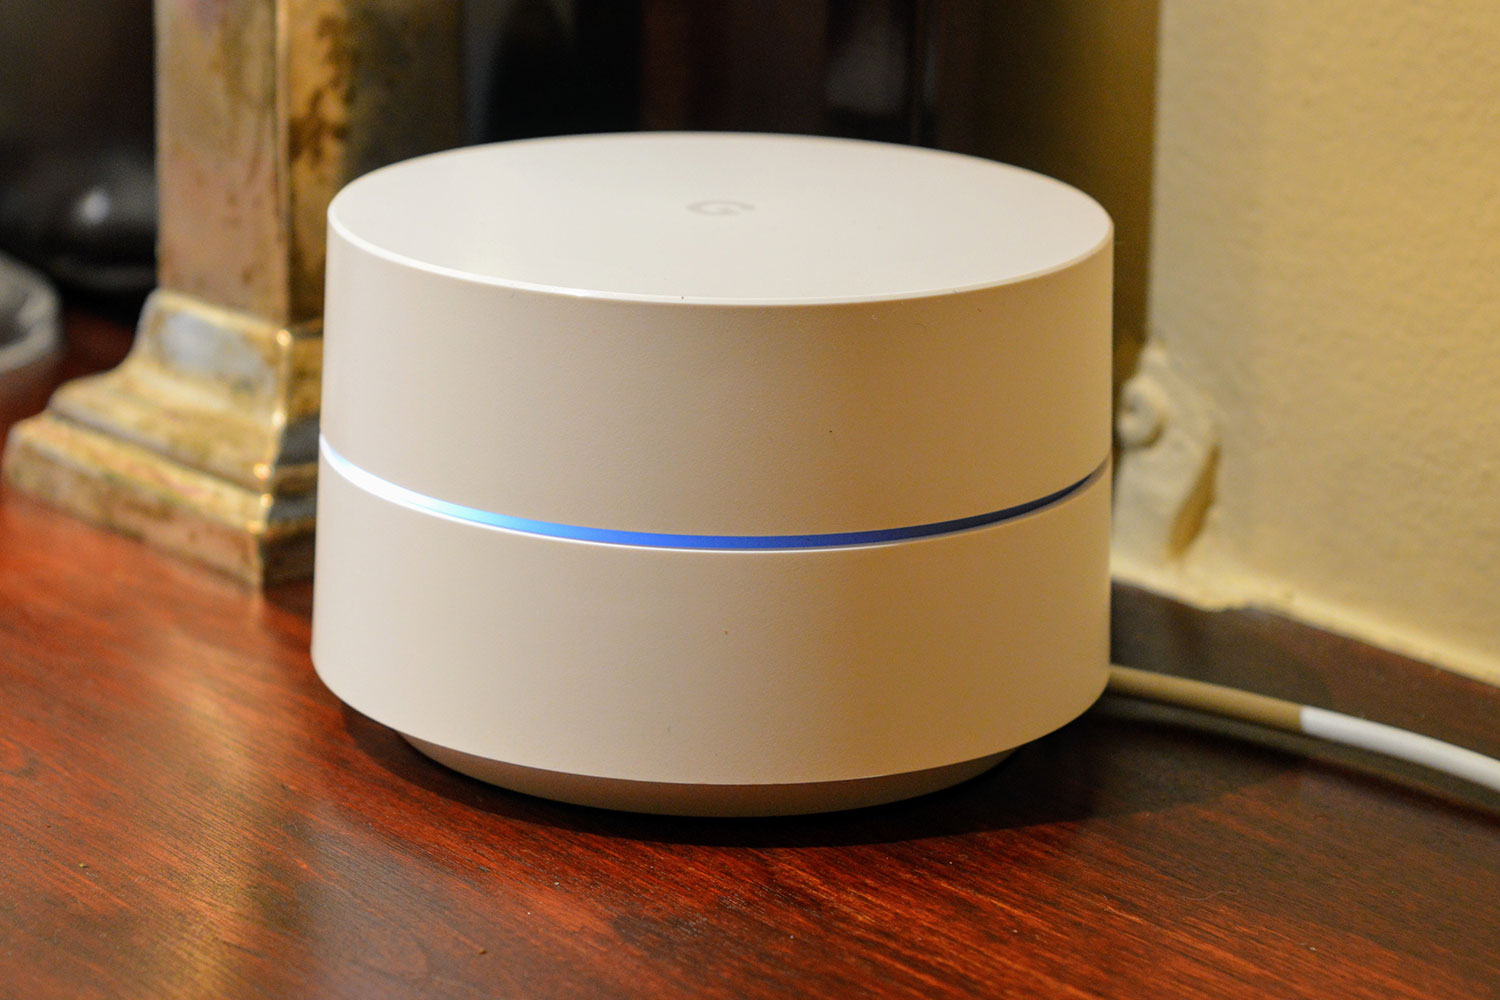 Google Wifi review: The easiest, cheapest way to fix bad Wi-Fi